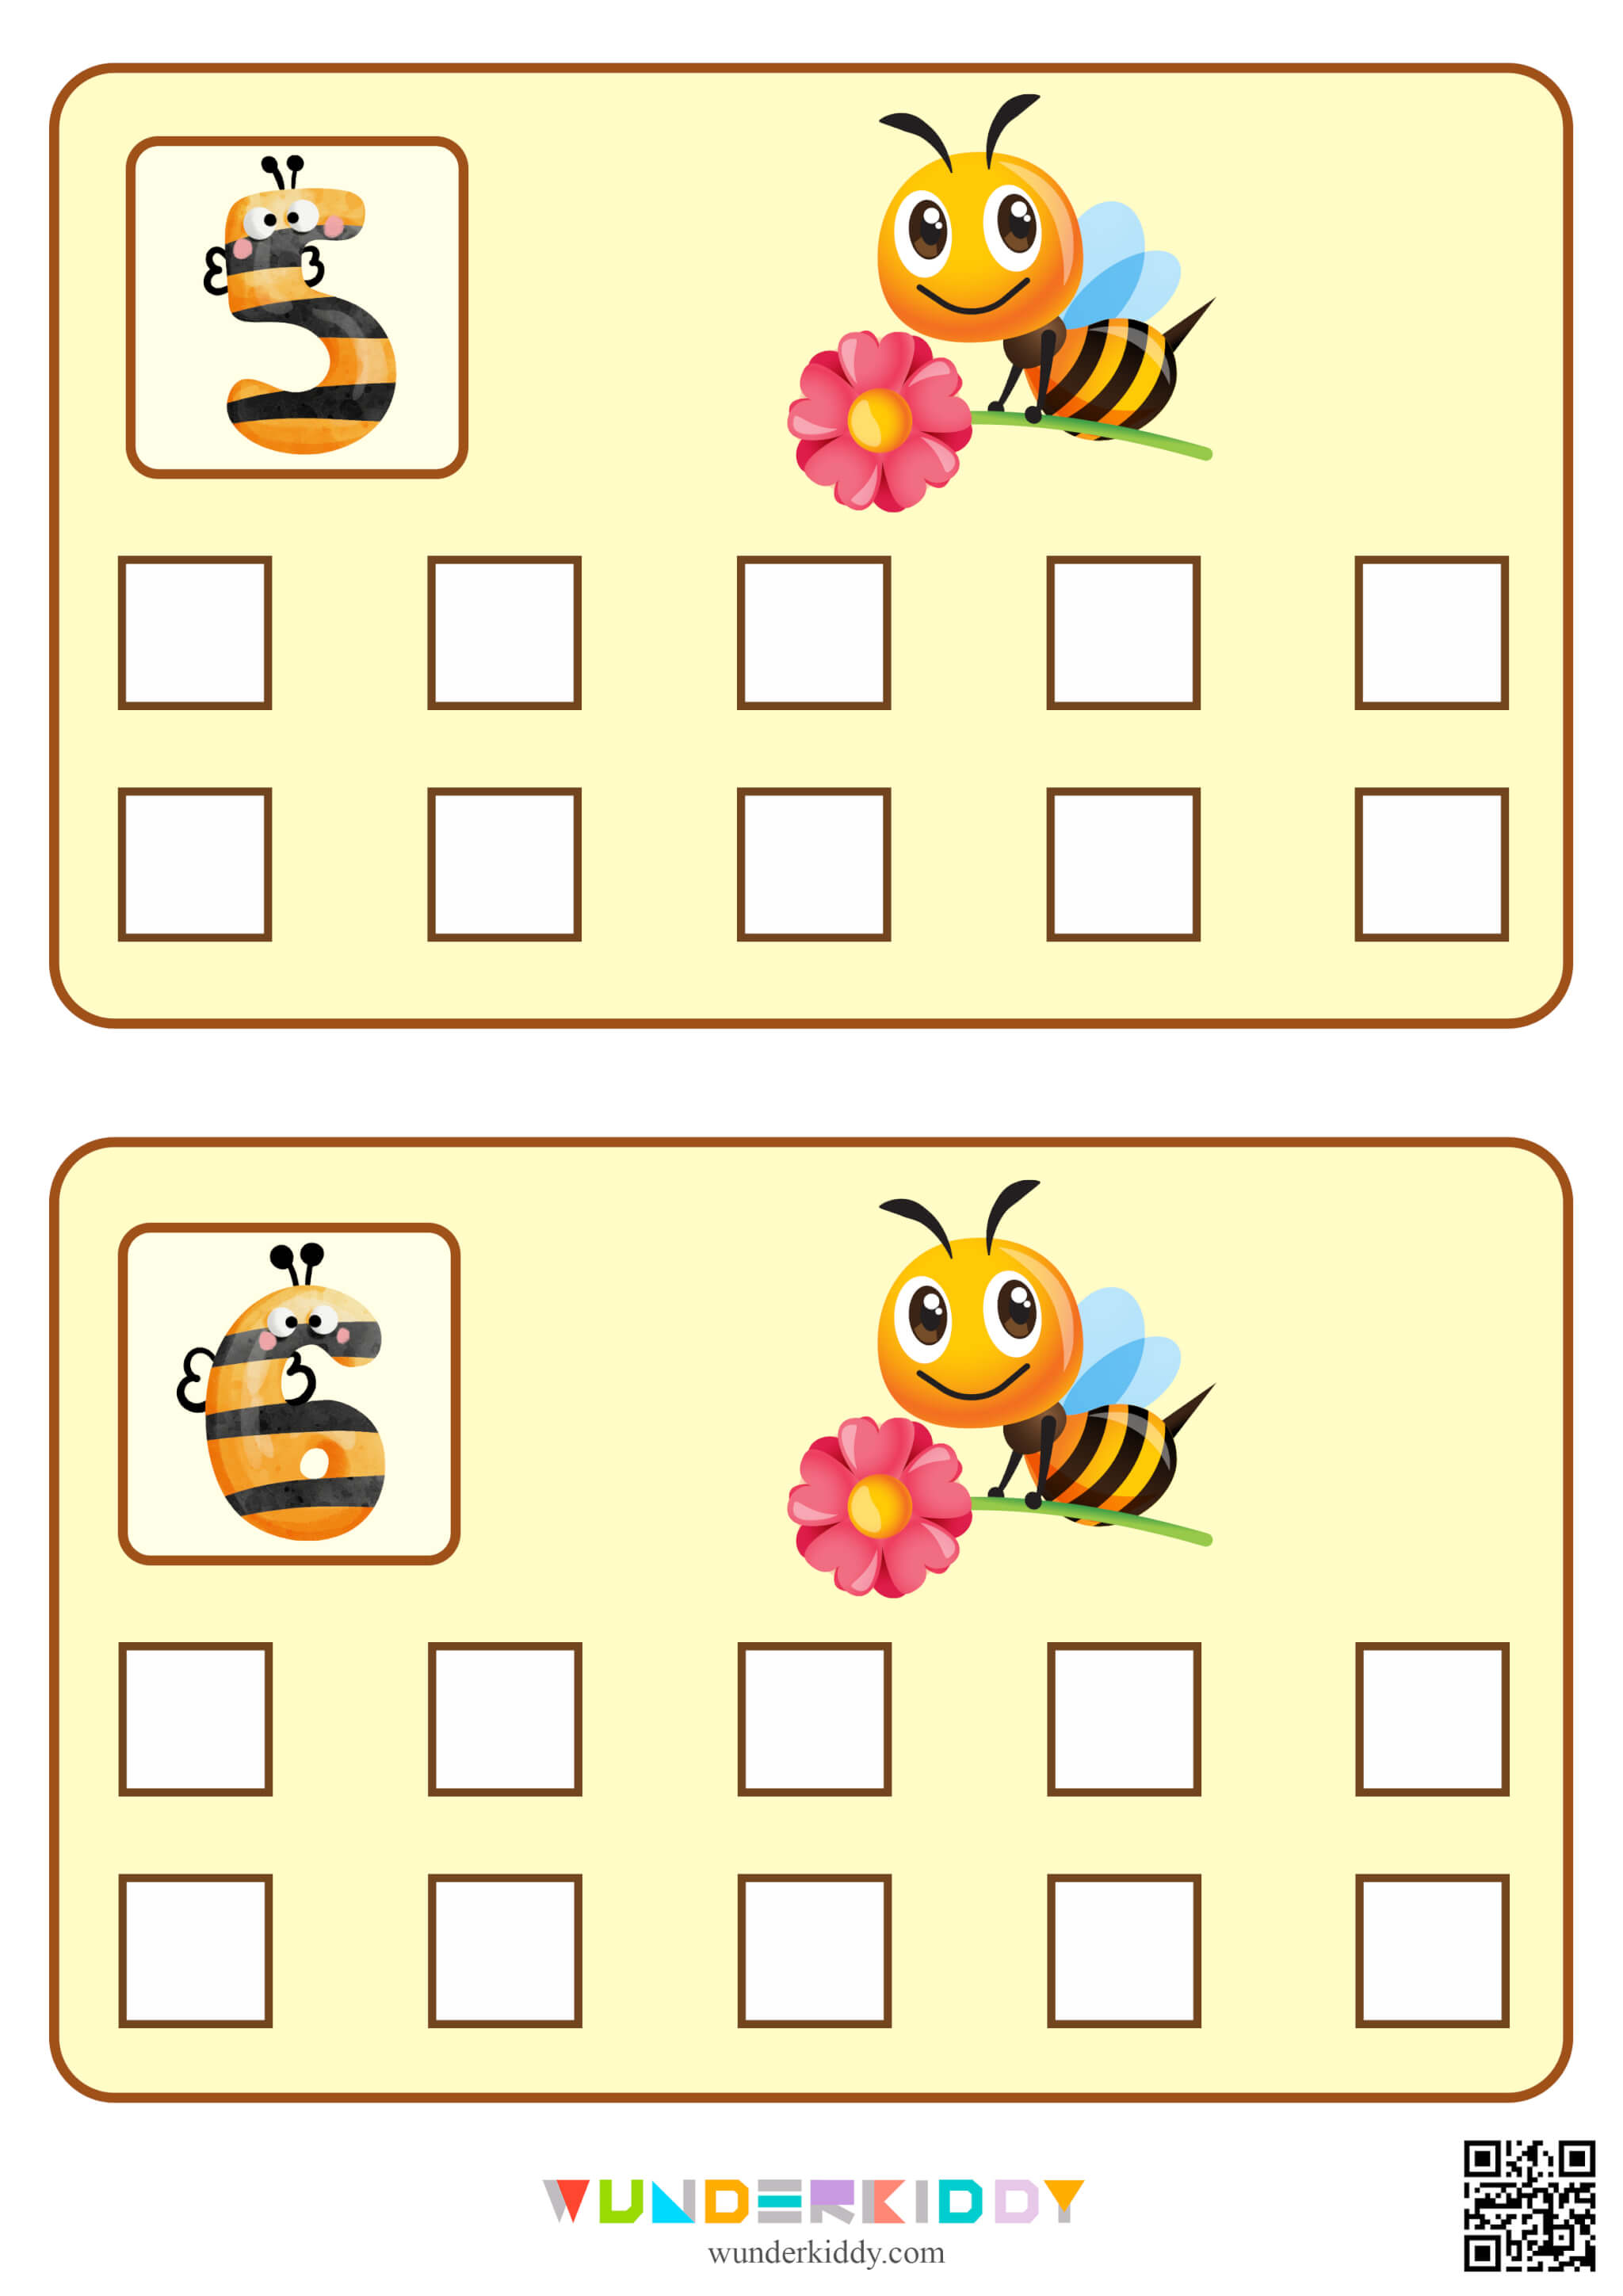 Flashcards to Practice Counting How Many Bees? - Image 4